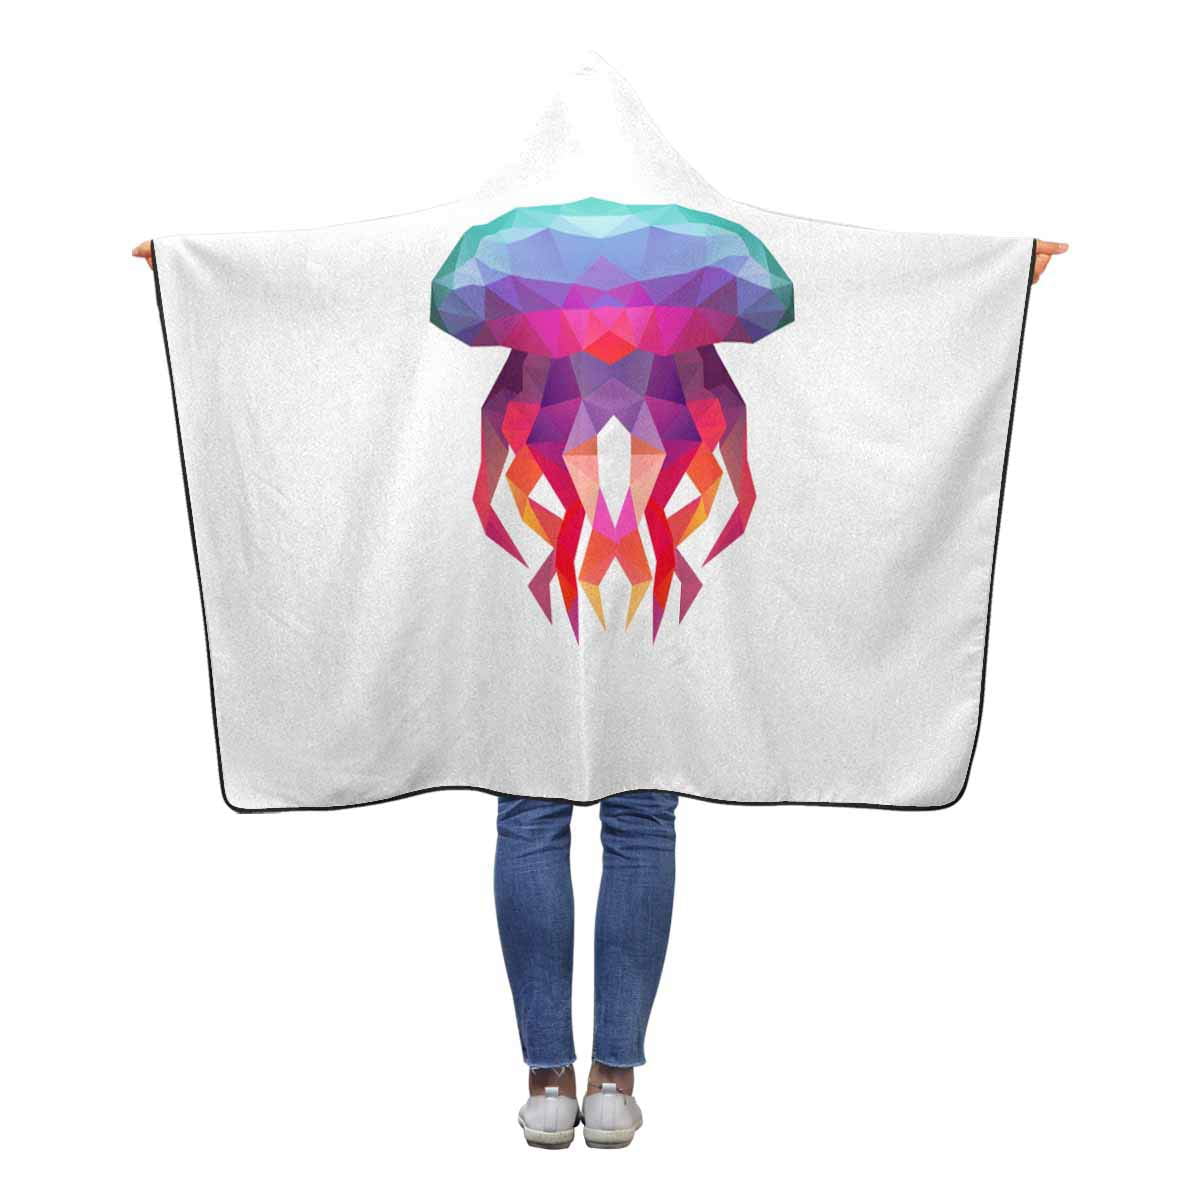 HATIART Abstract Polygonal Jellyfish Hooded Blanket 50x60 inches Kids ...